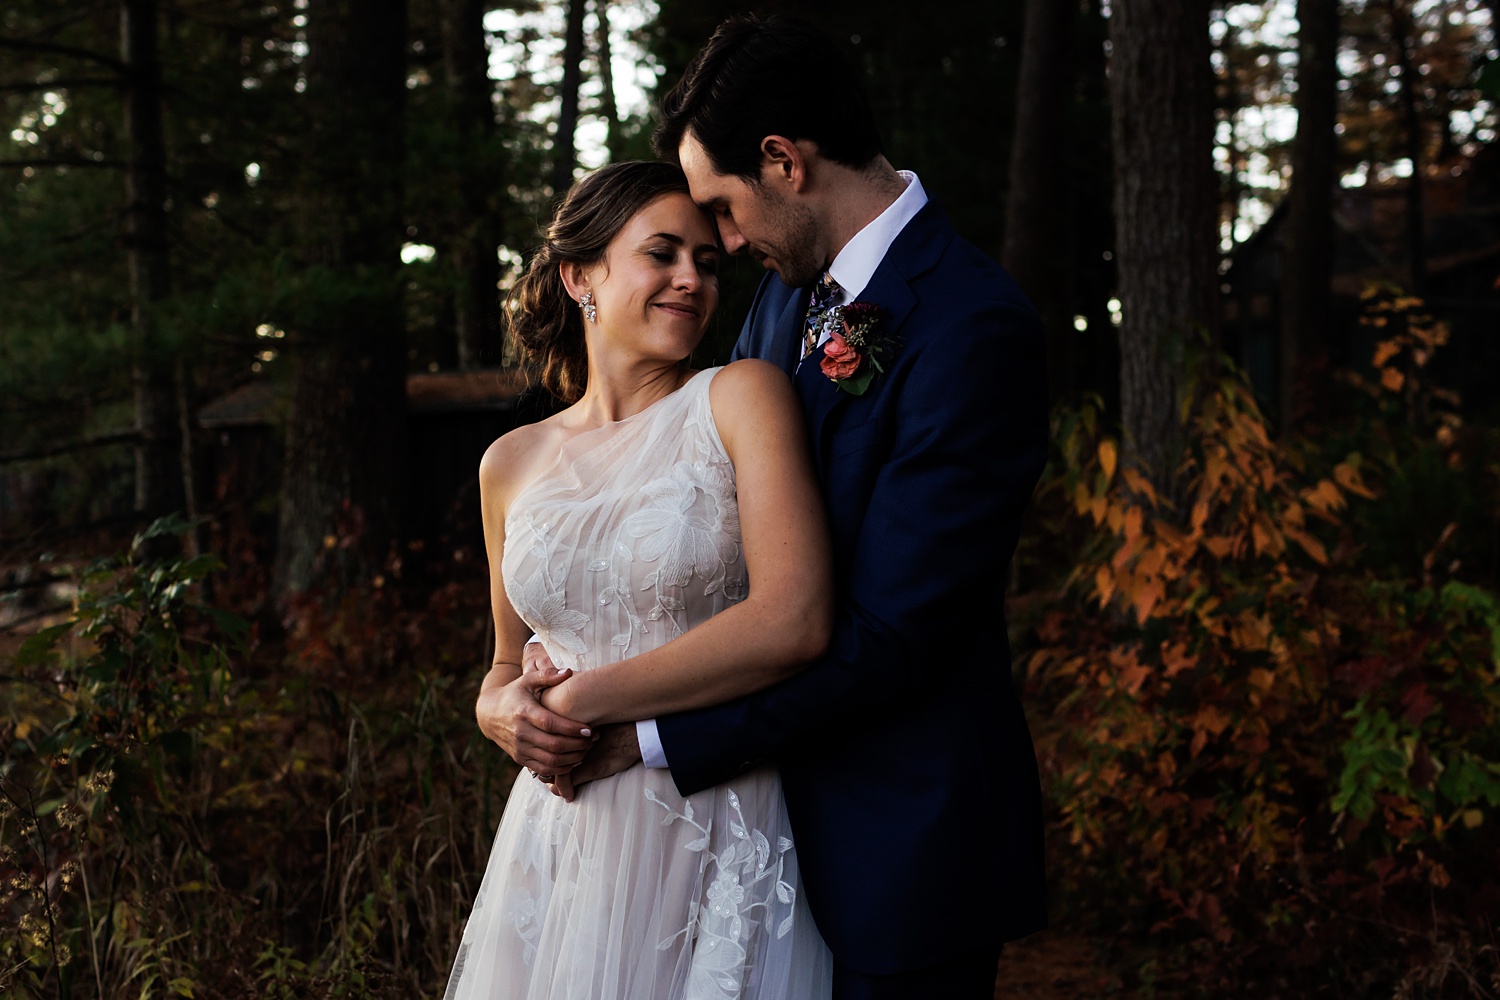 The bride and groom get in close while in the woods of Migis in Maine with a beautiful sunset